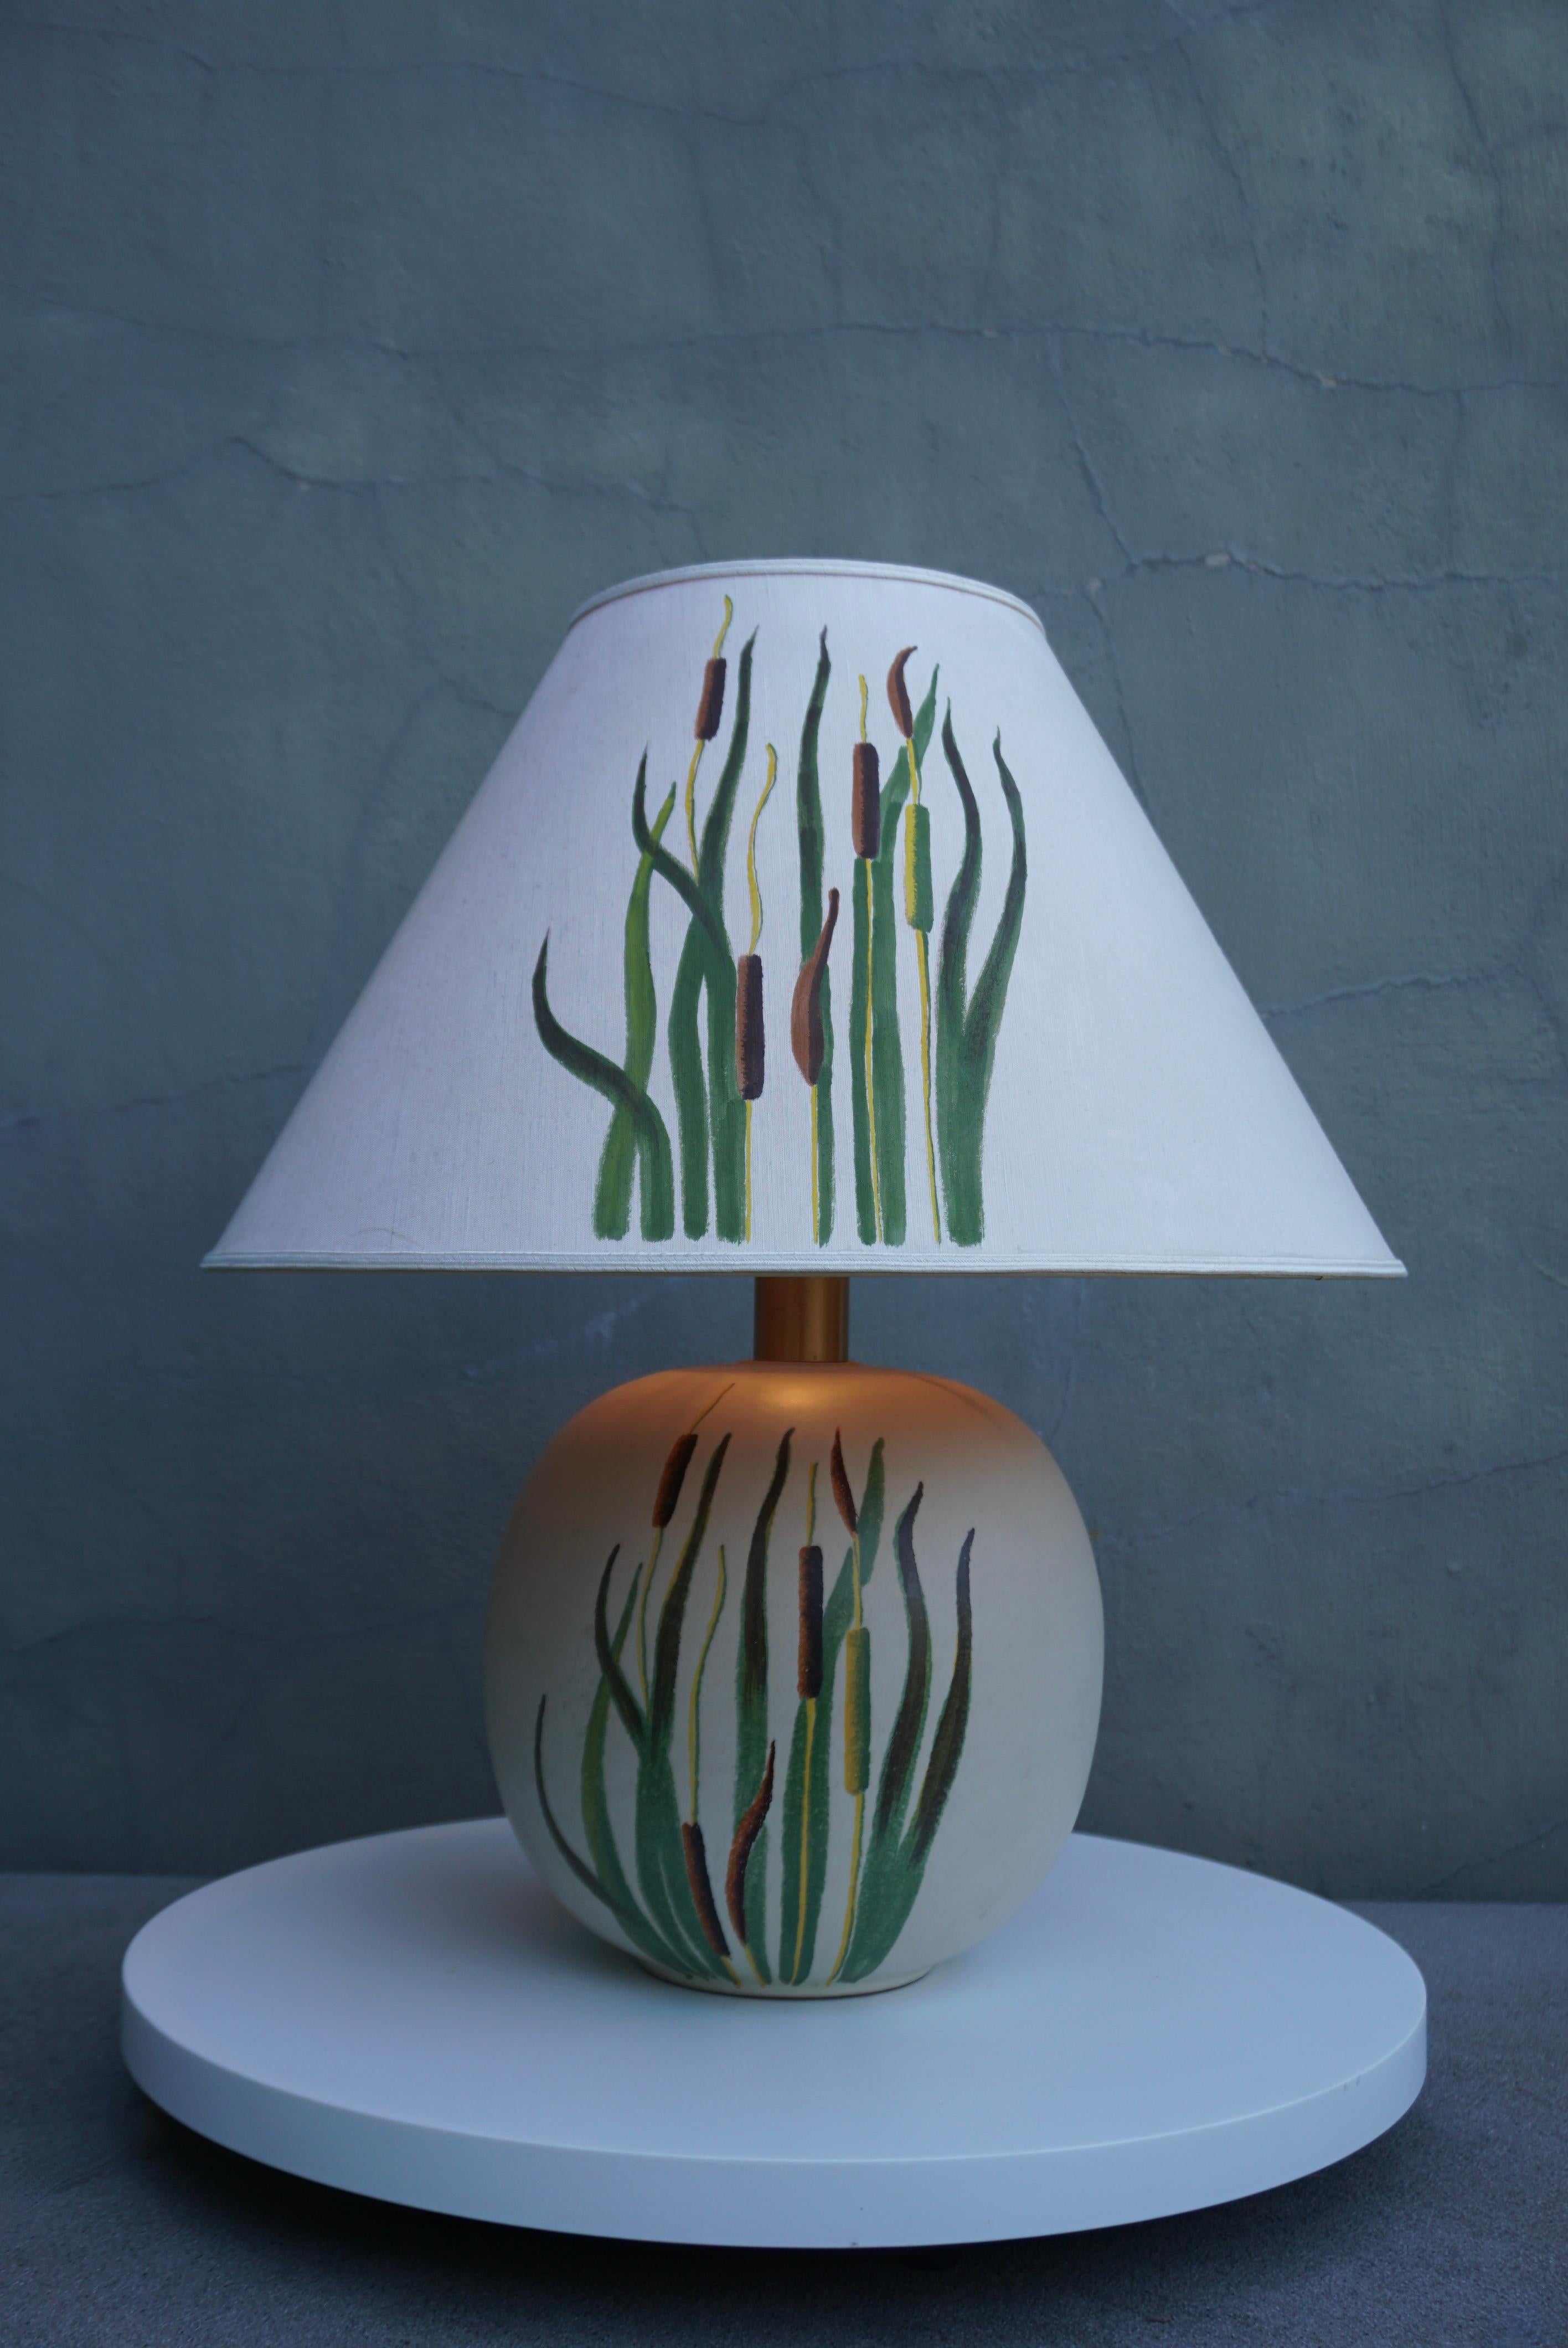 20th Century Ceramic Table Lamp with Botanical Representation of Cattails Grass For Sale